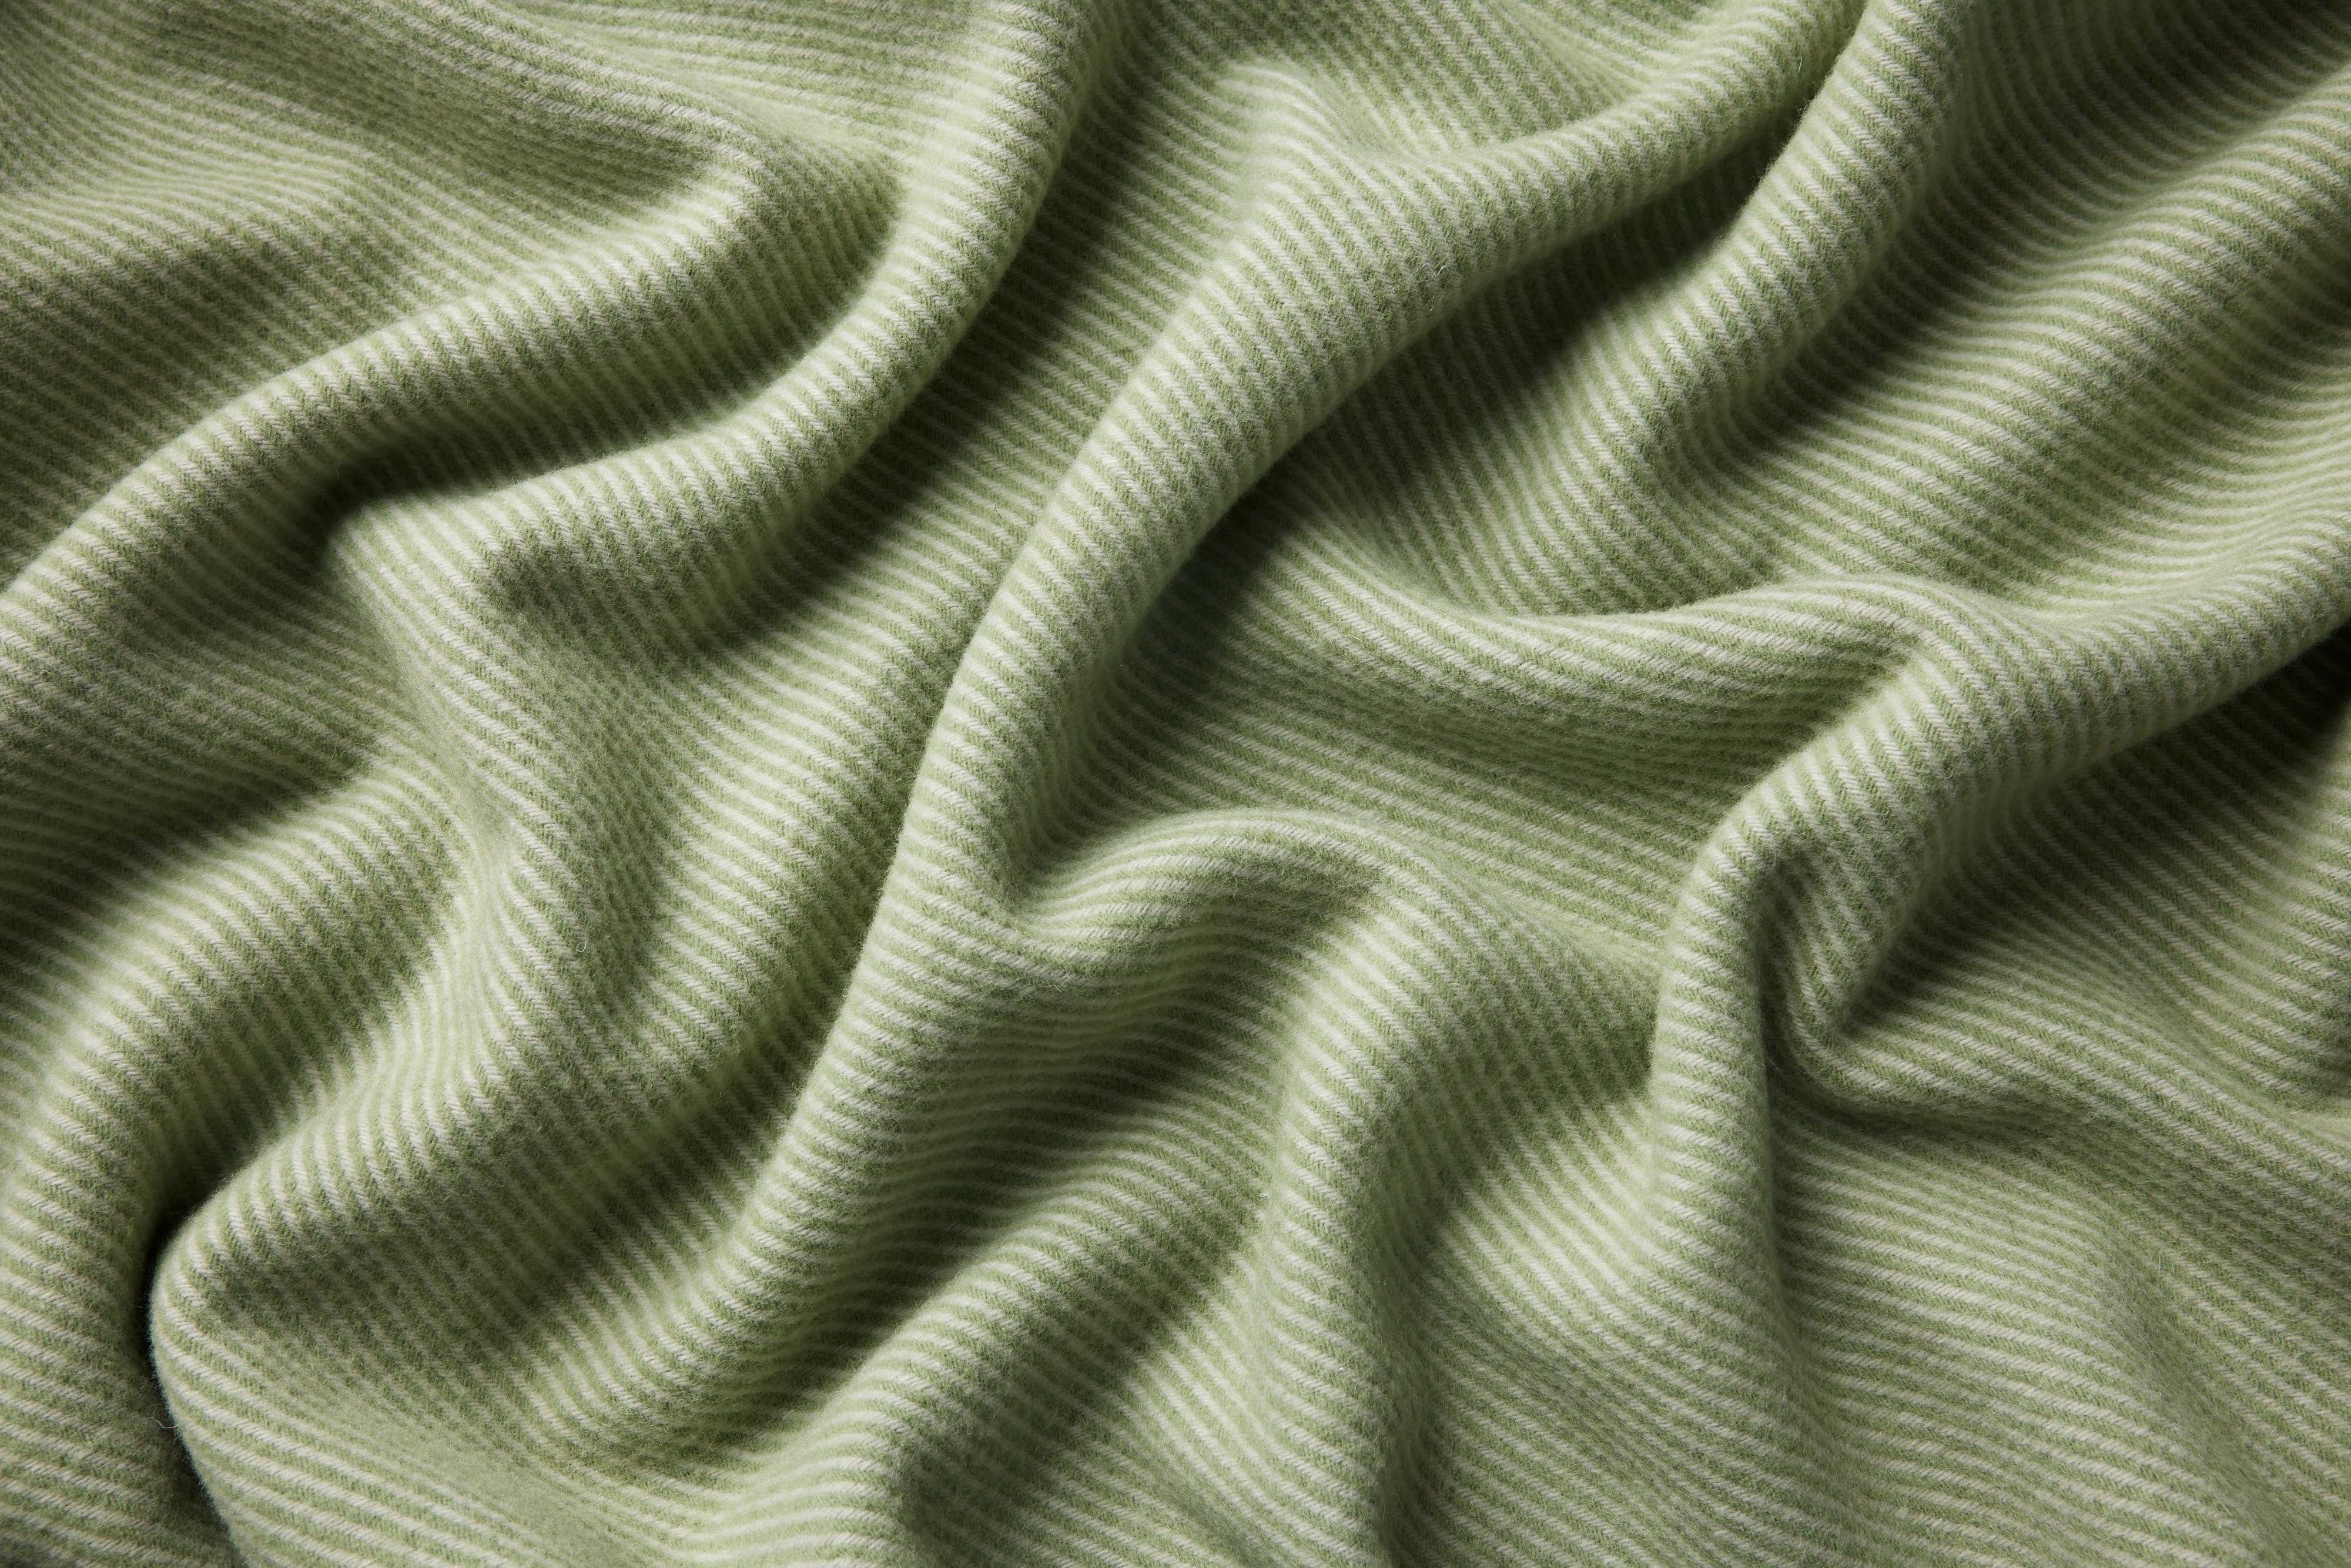 Close up of a flint blanket in moss showing the contrasting twill weave and drape.